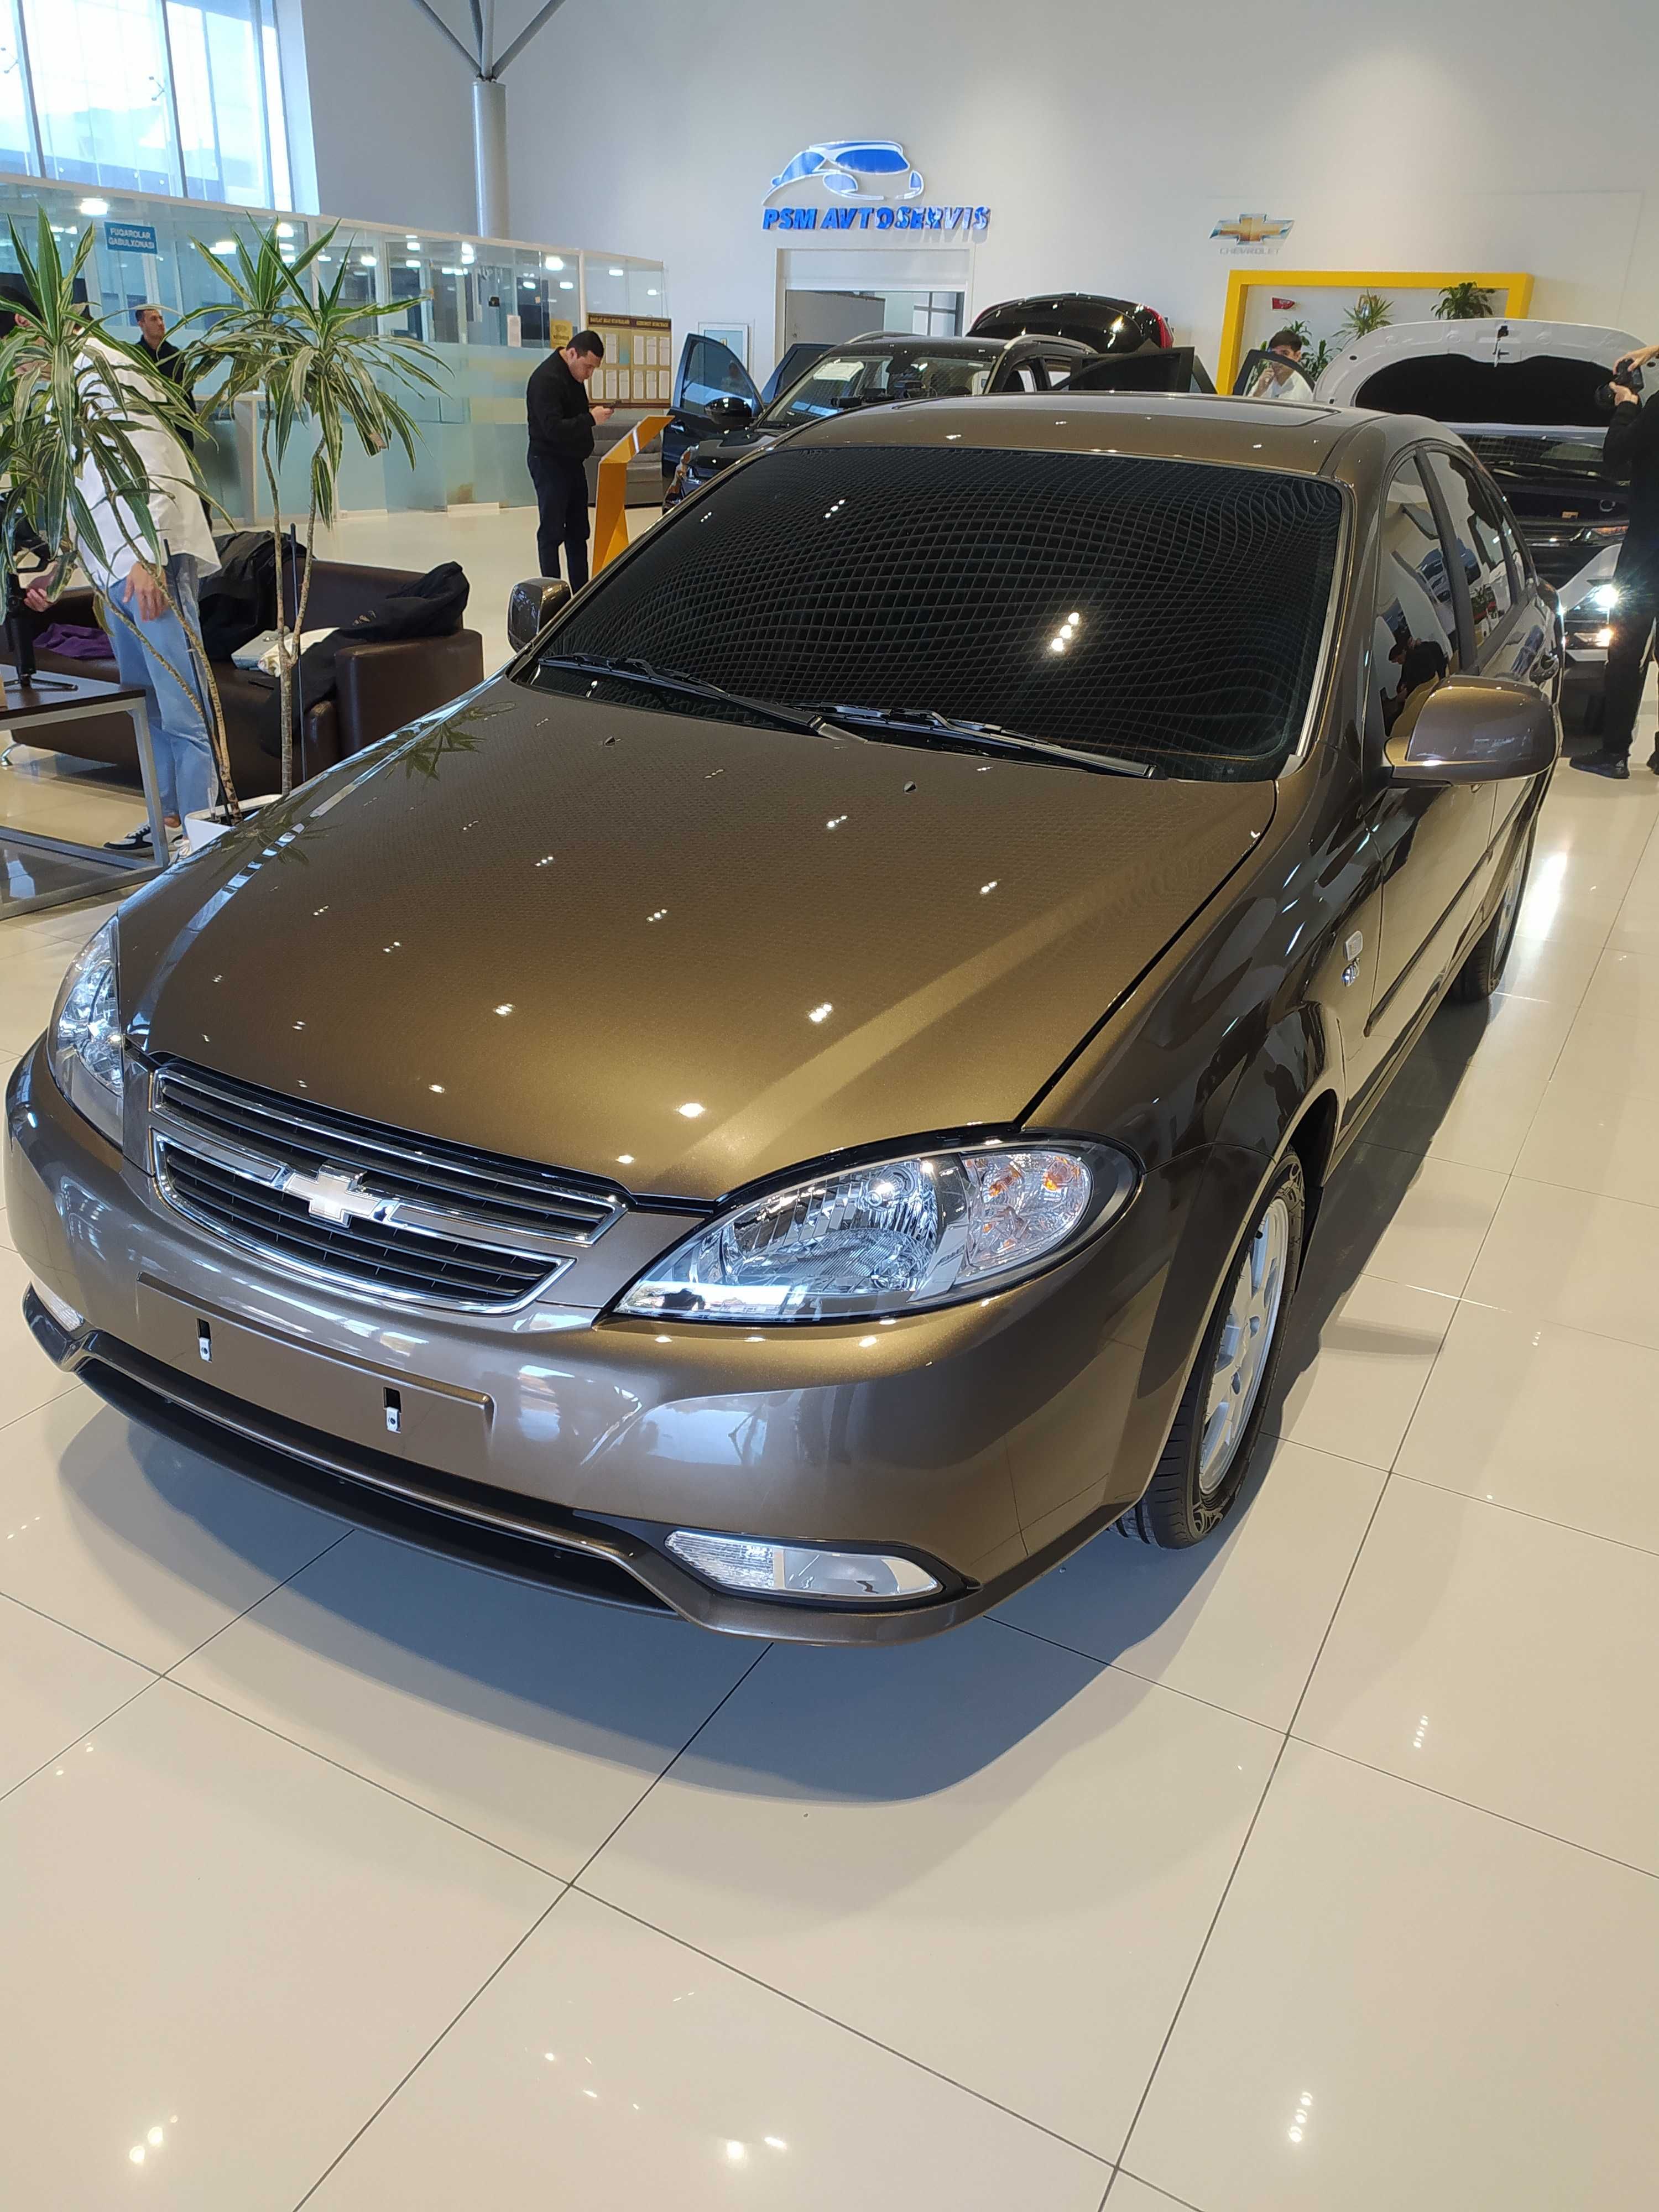 Янги Gentra Lacetti AT-Style Plus сотилади